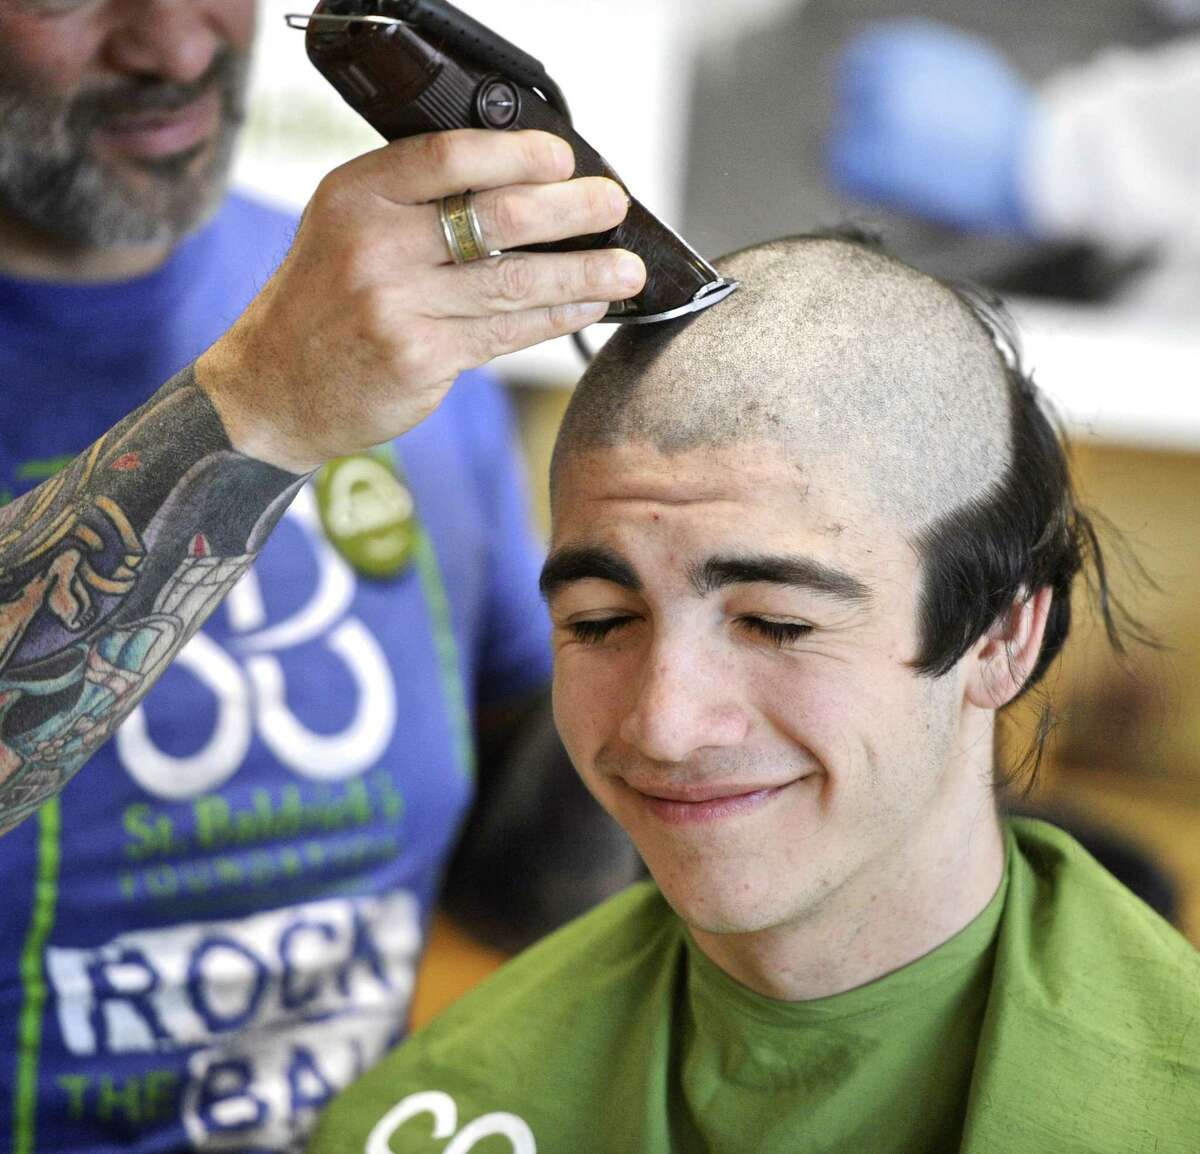 Jacob Lenes, 16, of Redding, a Junior at Joel Barlow High School, has his head shaved during the St. Baldrick's Foundation 6th annual "Brave A Shave for Kids with Cancer" event held at the school. This is Lenes's sixth year taking part in the event. Monday morning, March 13, 2017, in Redding, Conn.